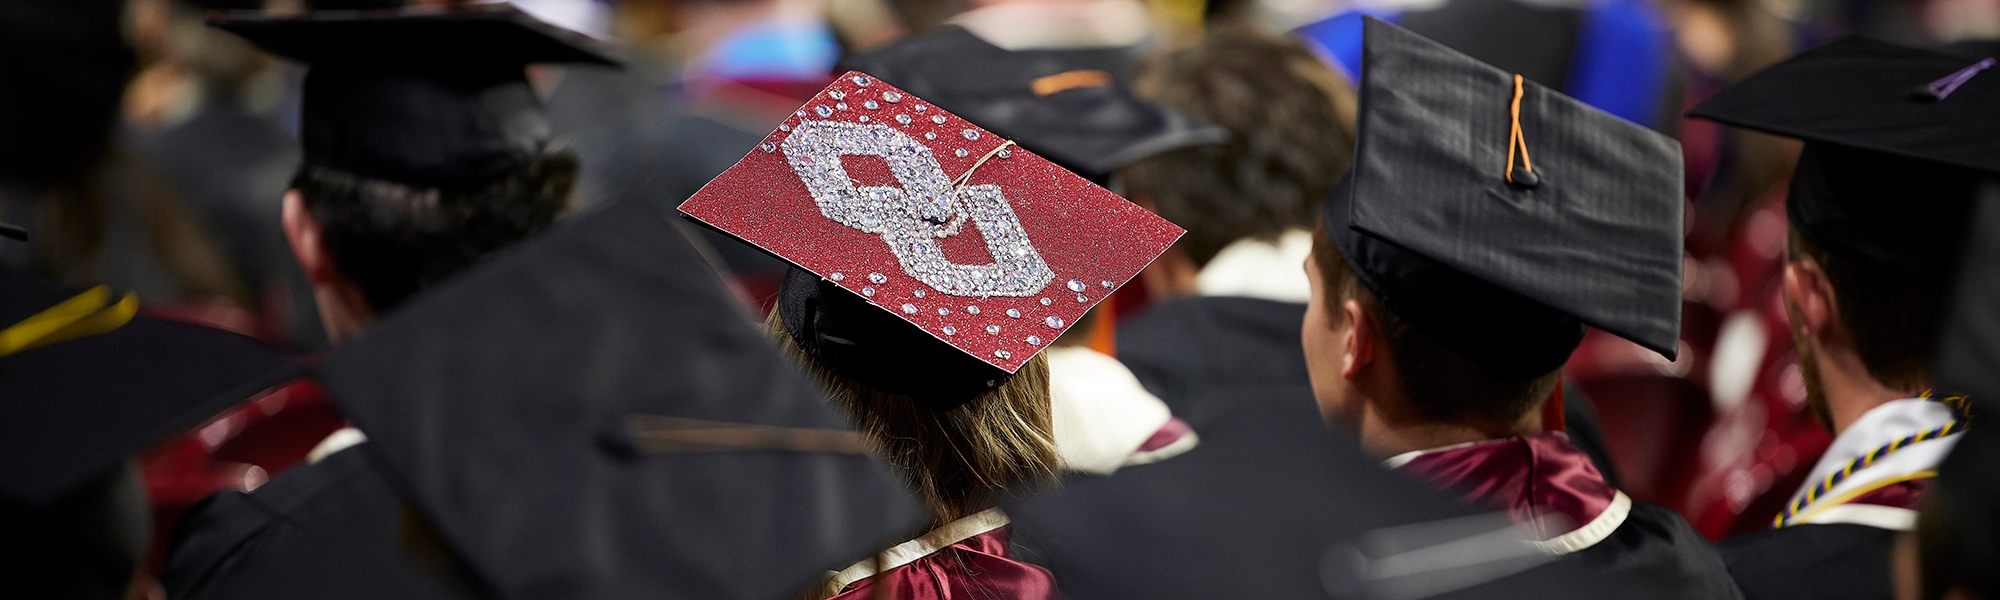 OU students dressed in graduation regalia sitting at a commencement ceremony.